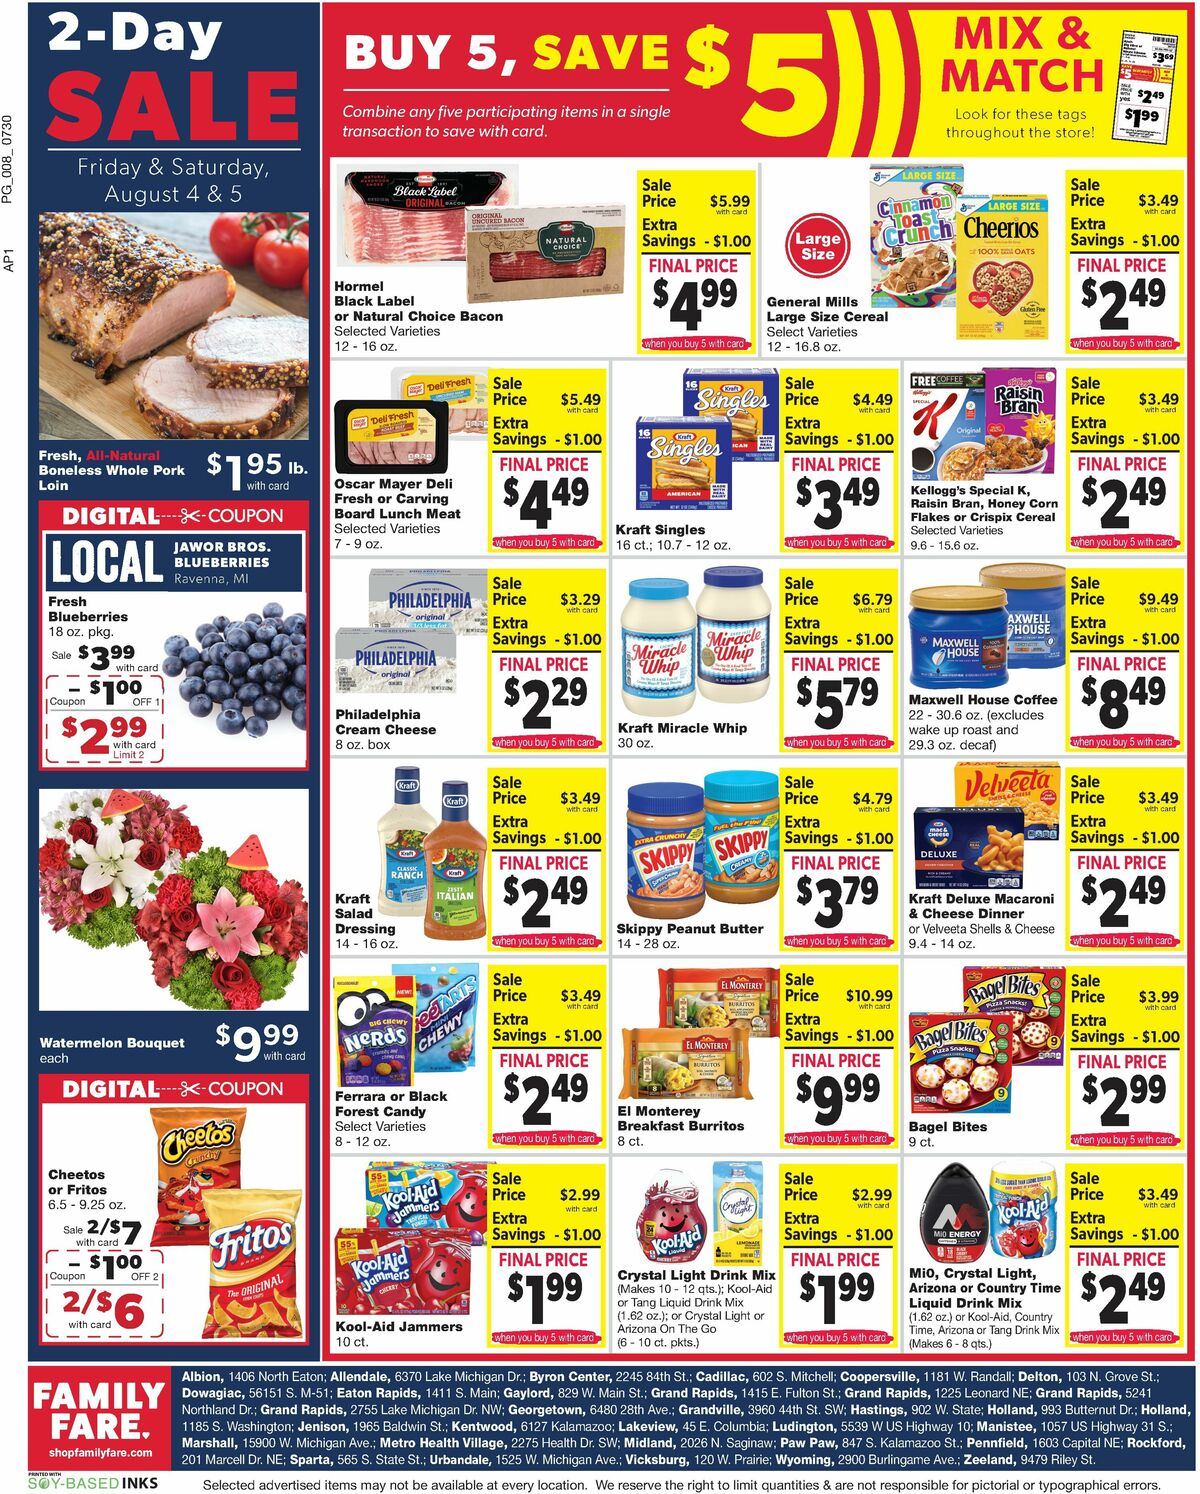 Family Fare Weekly Ad from July 30